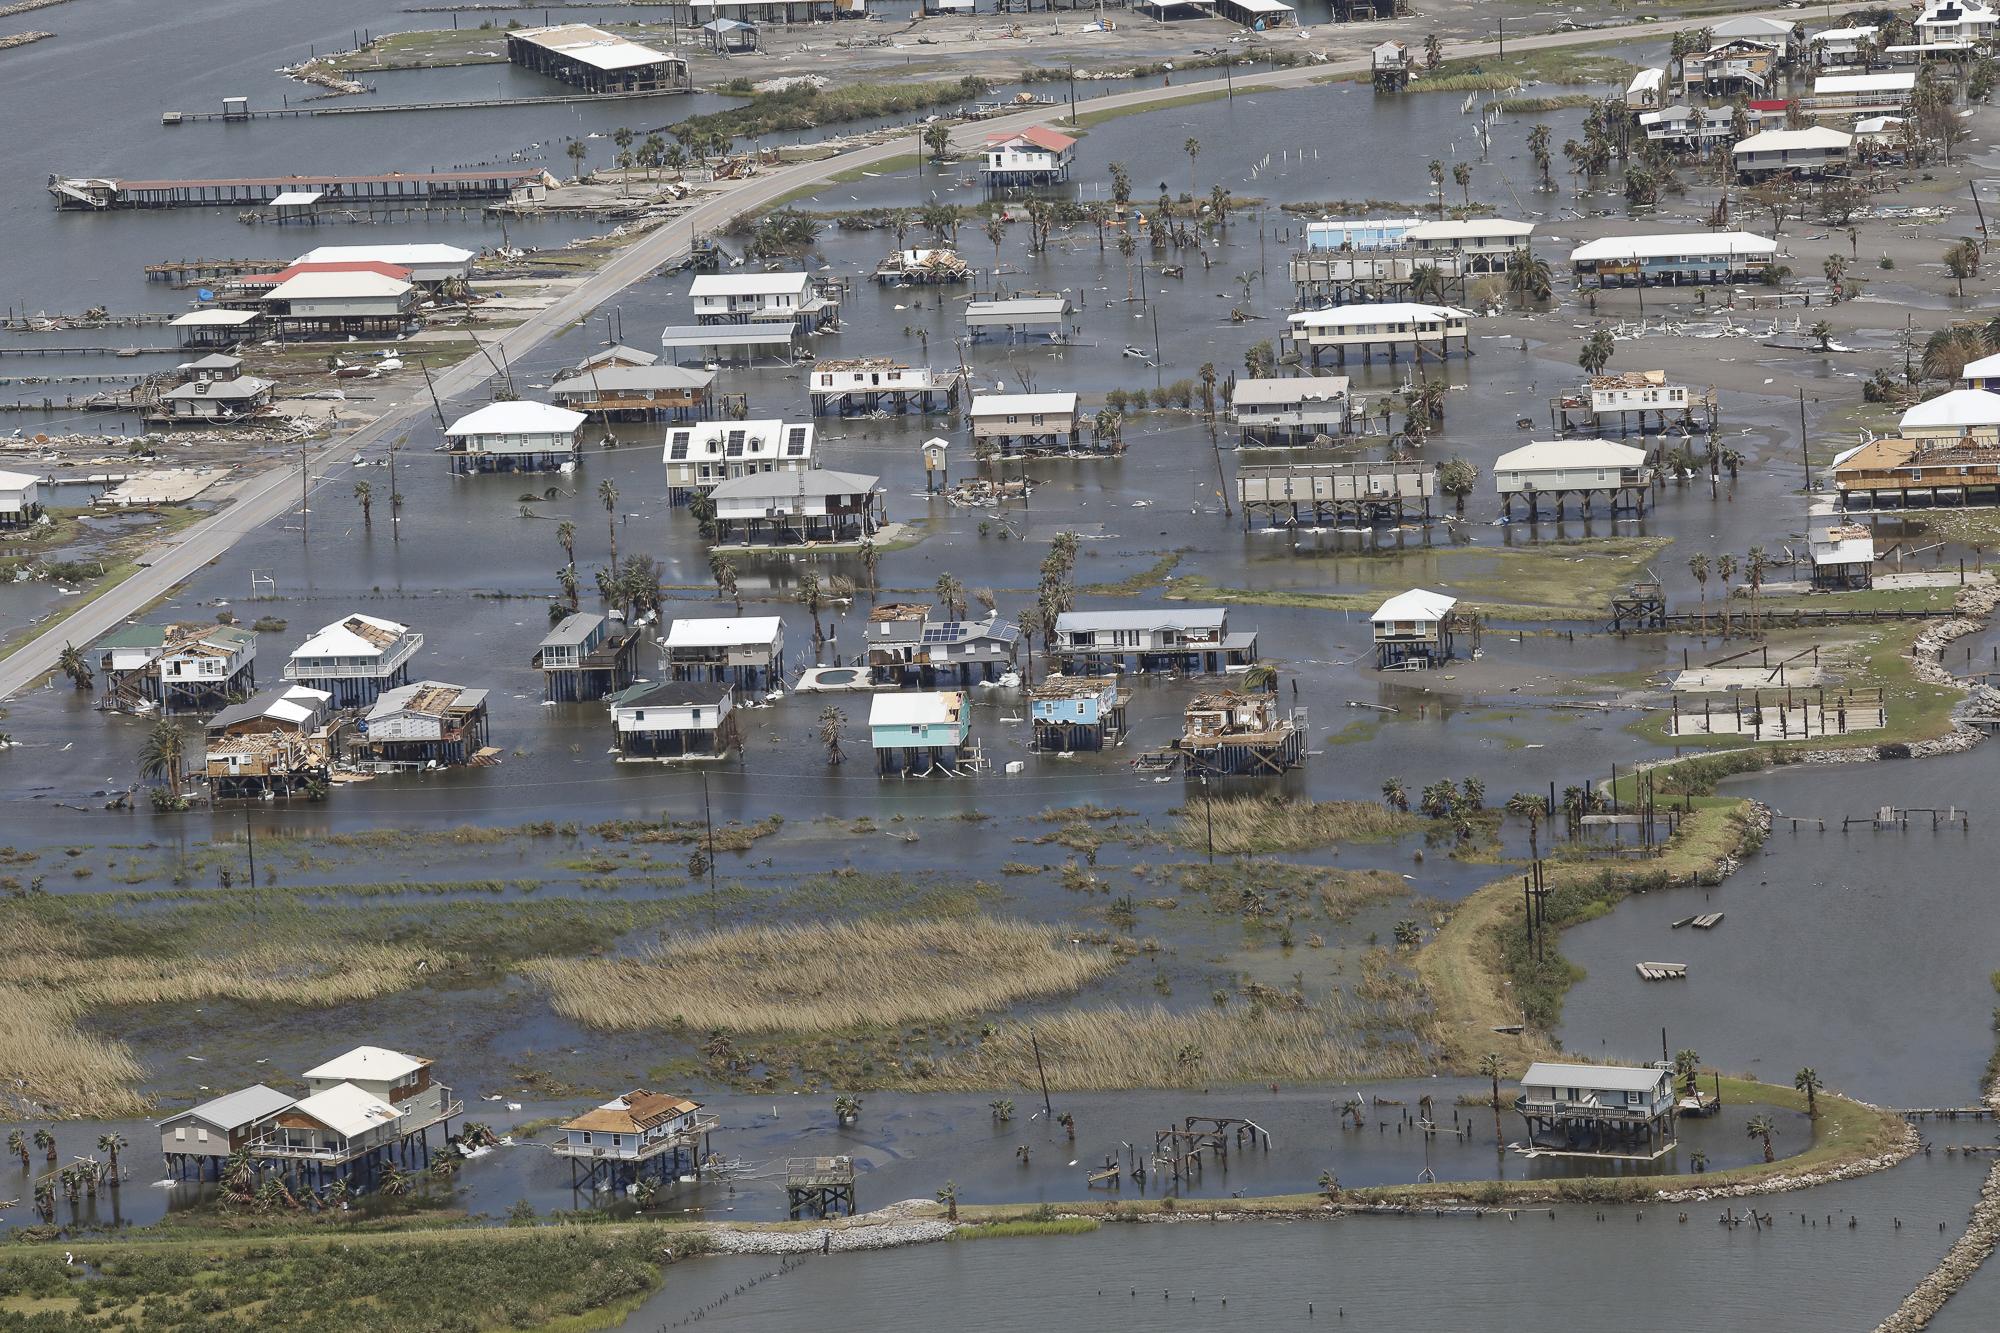 Hurricane Ida in Louisiana - An aerial view shows destroyed houses in a flooded area...